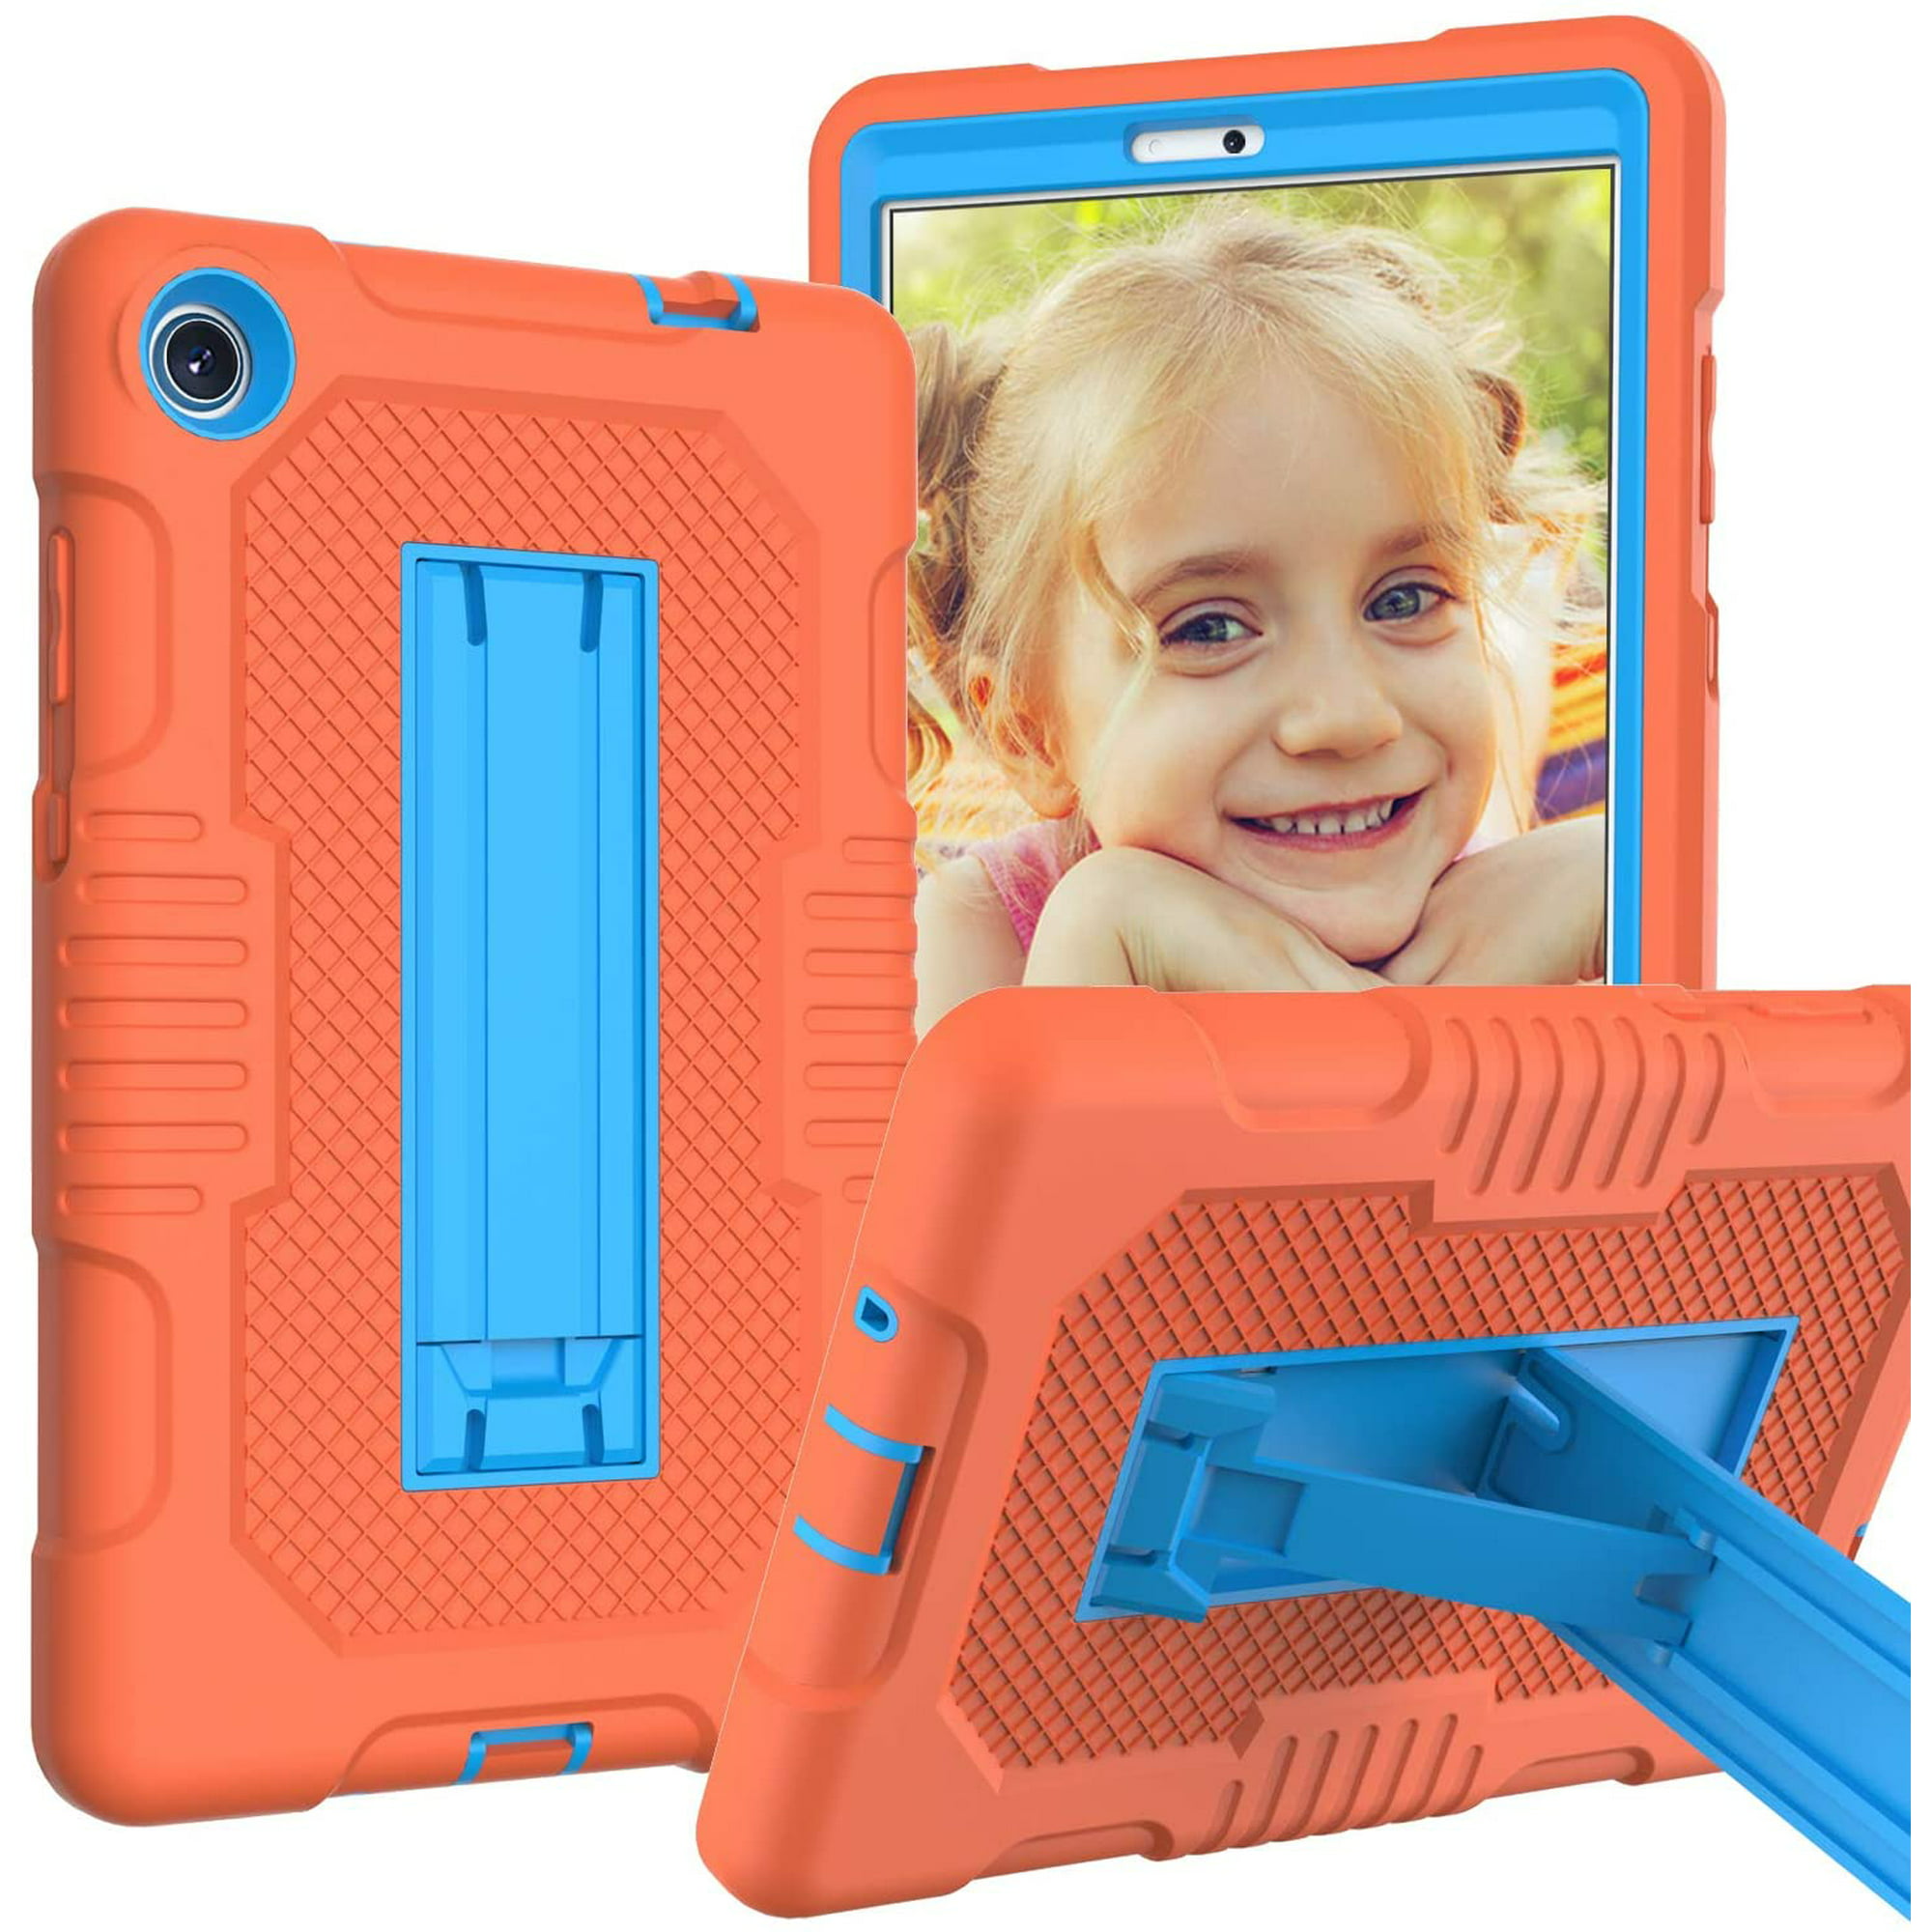 QST Case for Lenovo M8 Tablet Case for Kids | Compatible with Lenovo Tab M8  Case 8505F/8505XFS for Boys Girls with Kickstand | Shockproof Rugged Case  for Lenovo Smart Tab M8 Tablet,